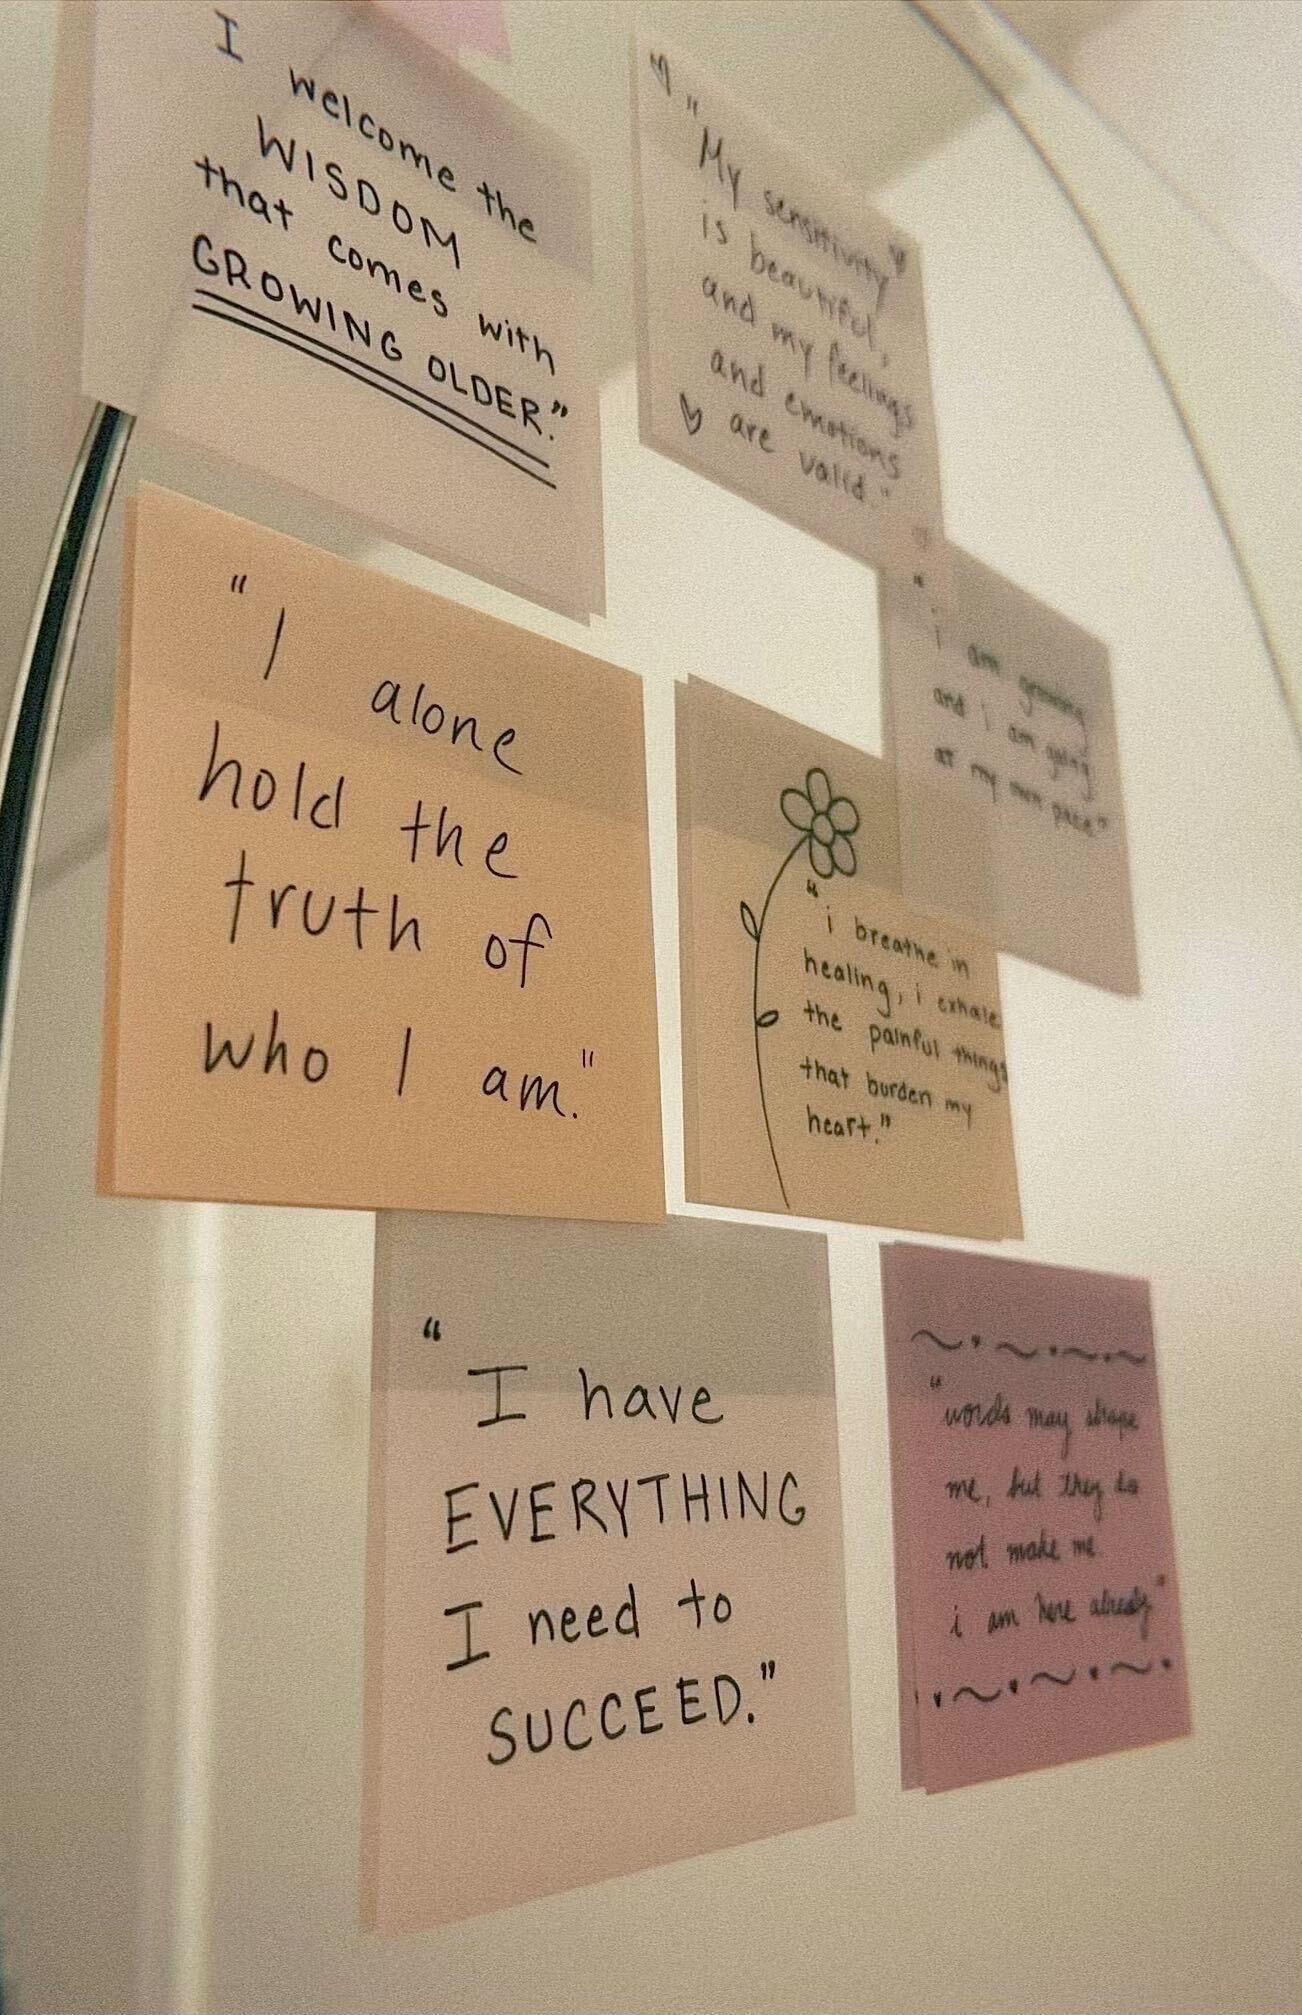 Pastel transparent sticky notes with positive affirmations written on them, posted on a bathroom mirror.